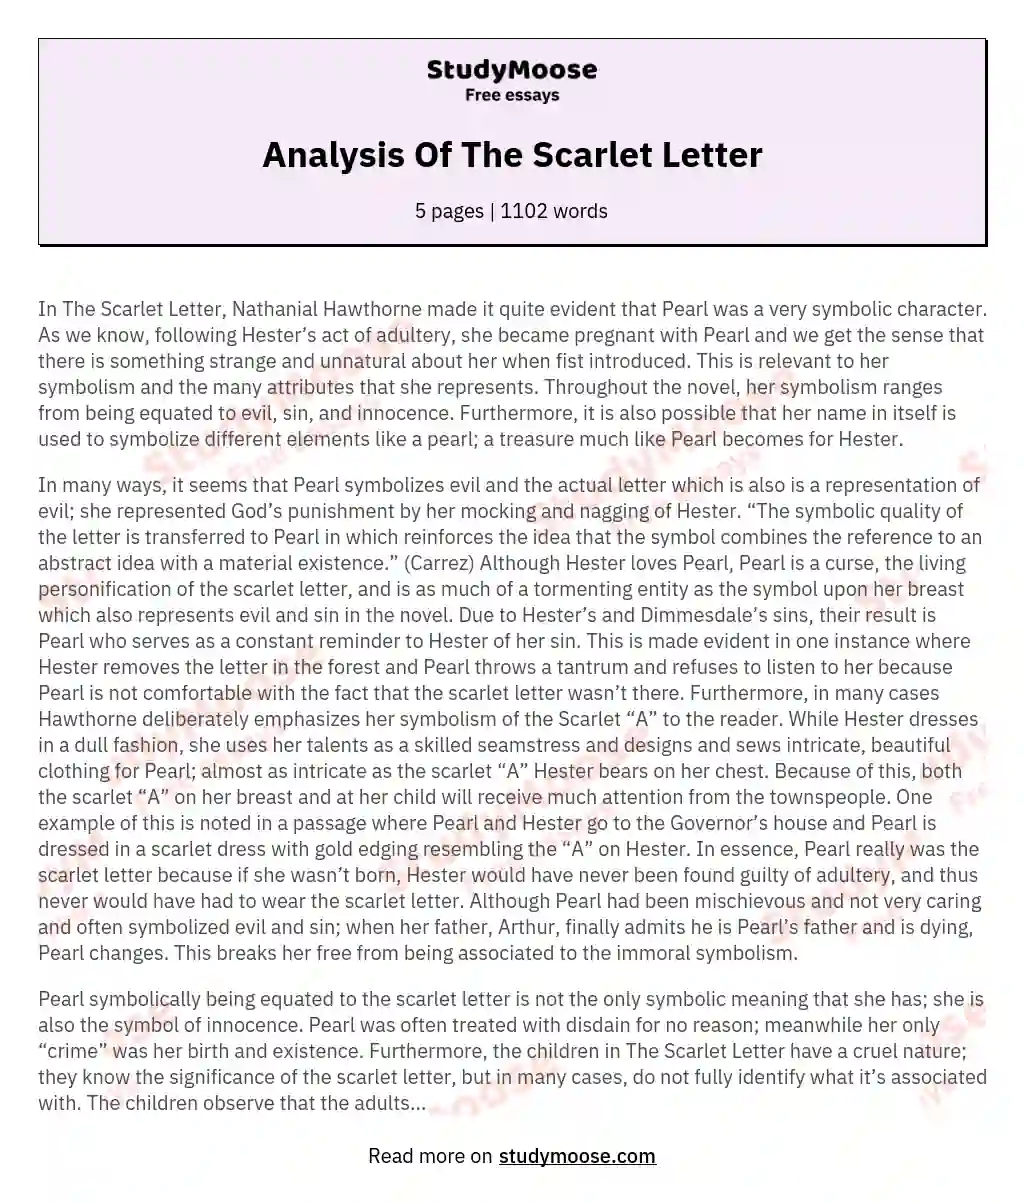 Analysis Of The Scarlet Letter